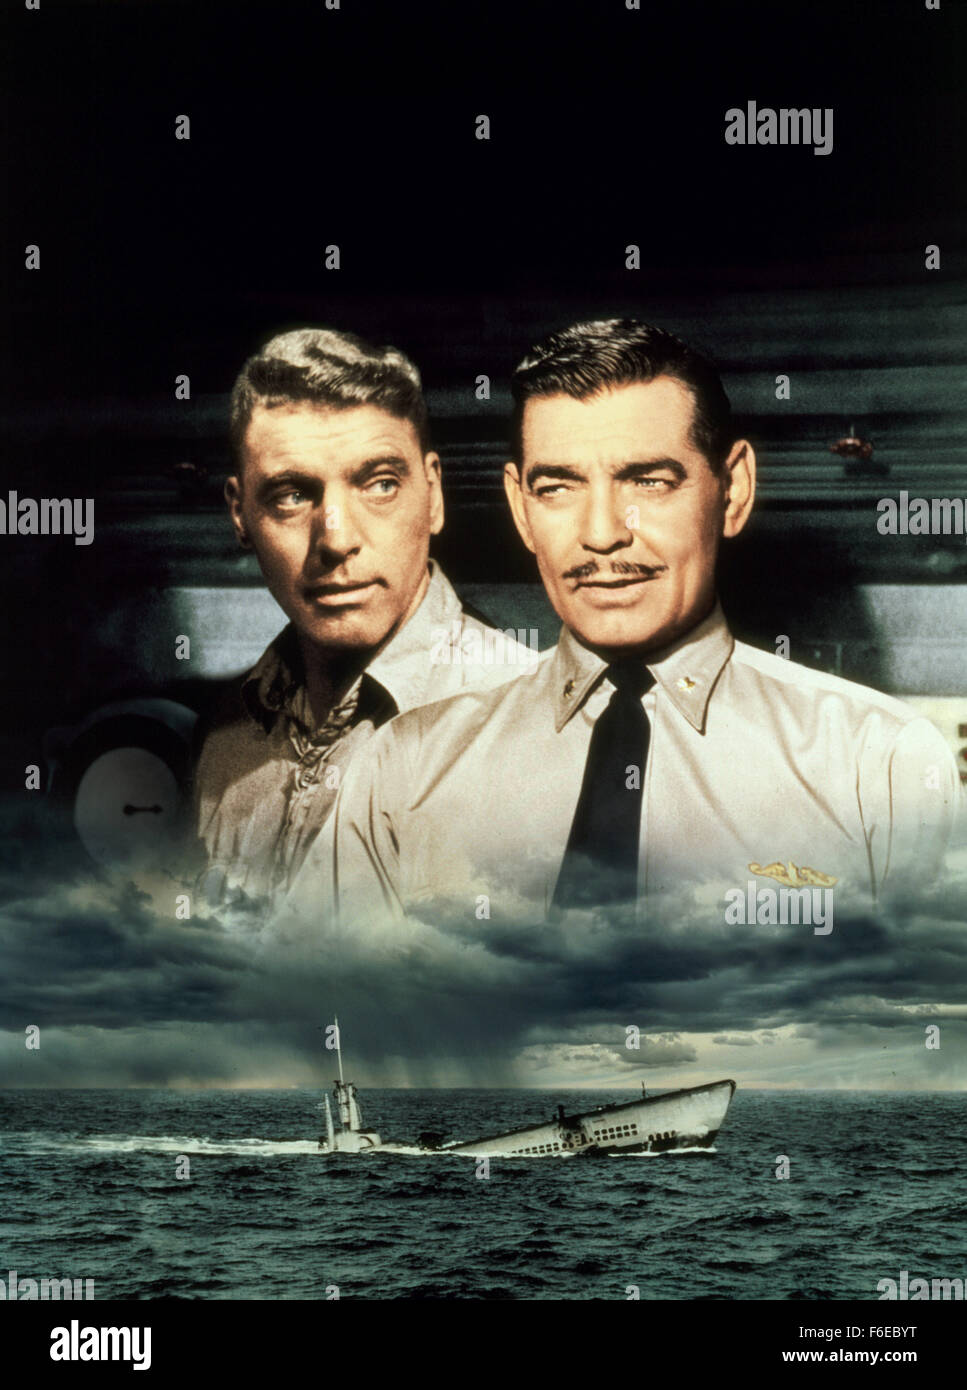 RELEASE DATE: March 27, 1958. MOVIE TITLE: Run Silent Run Deep. STUDIO: Jeffrey Pictures Corp. PLOT: The captain of a submarine sunk by the Japanese during WWII is finally given a chance to skipper another sub after a year of working a desk job. His singleminded determination for revenge against the destroyer that sunk his previous vessel puts his new crew in unneccessary danger. PICTURED: CLARK GABLE as Cmdr. Richardson and BURT LANCASTER as Lt. Jim Bledsoe. Stock Photo